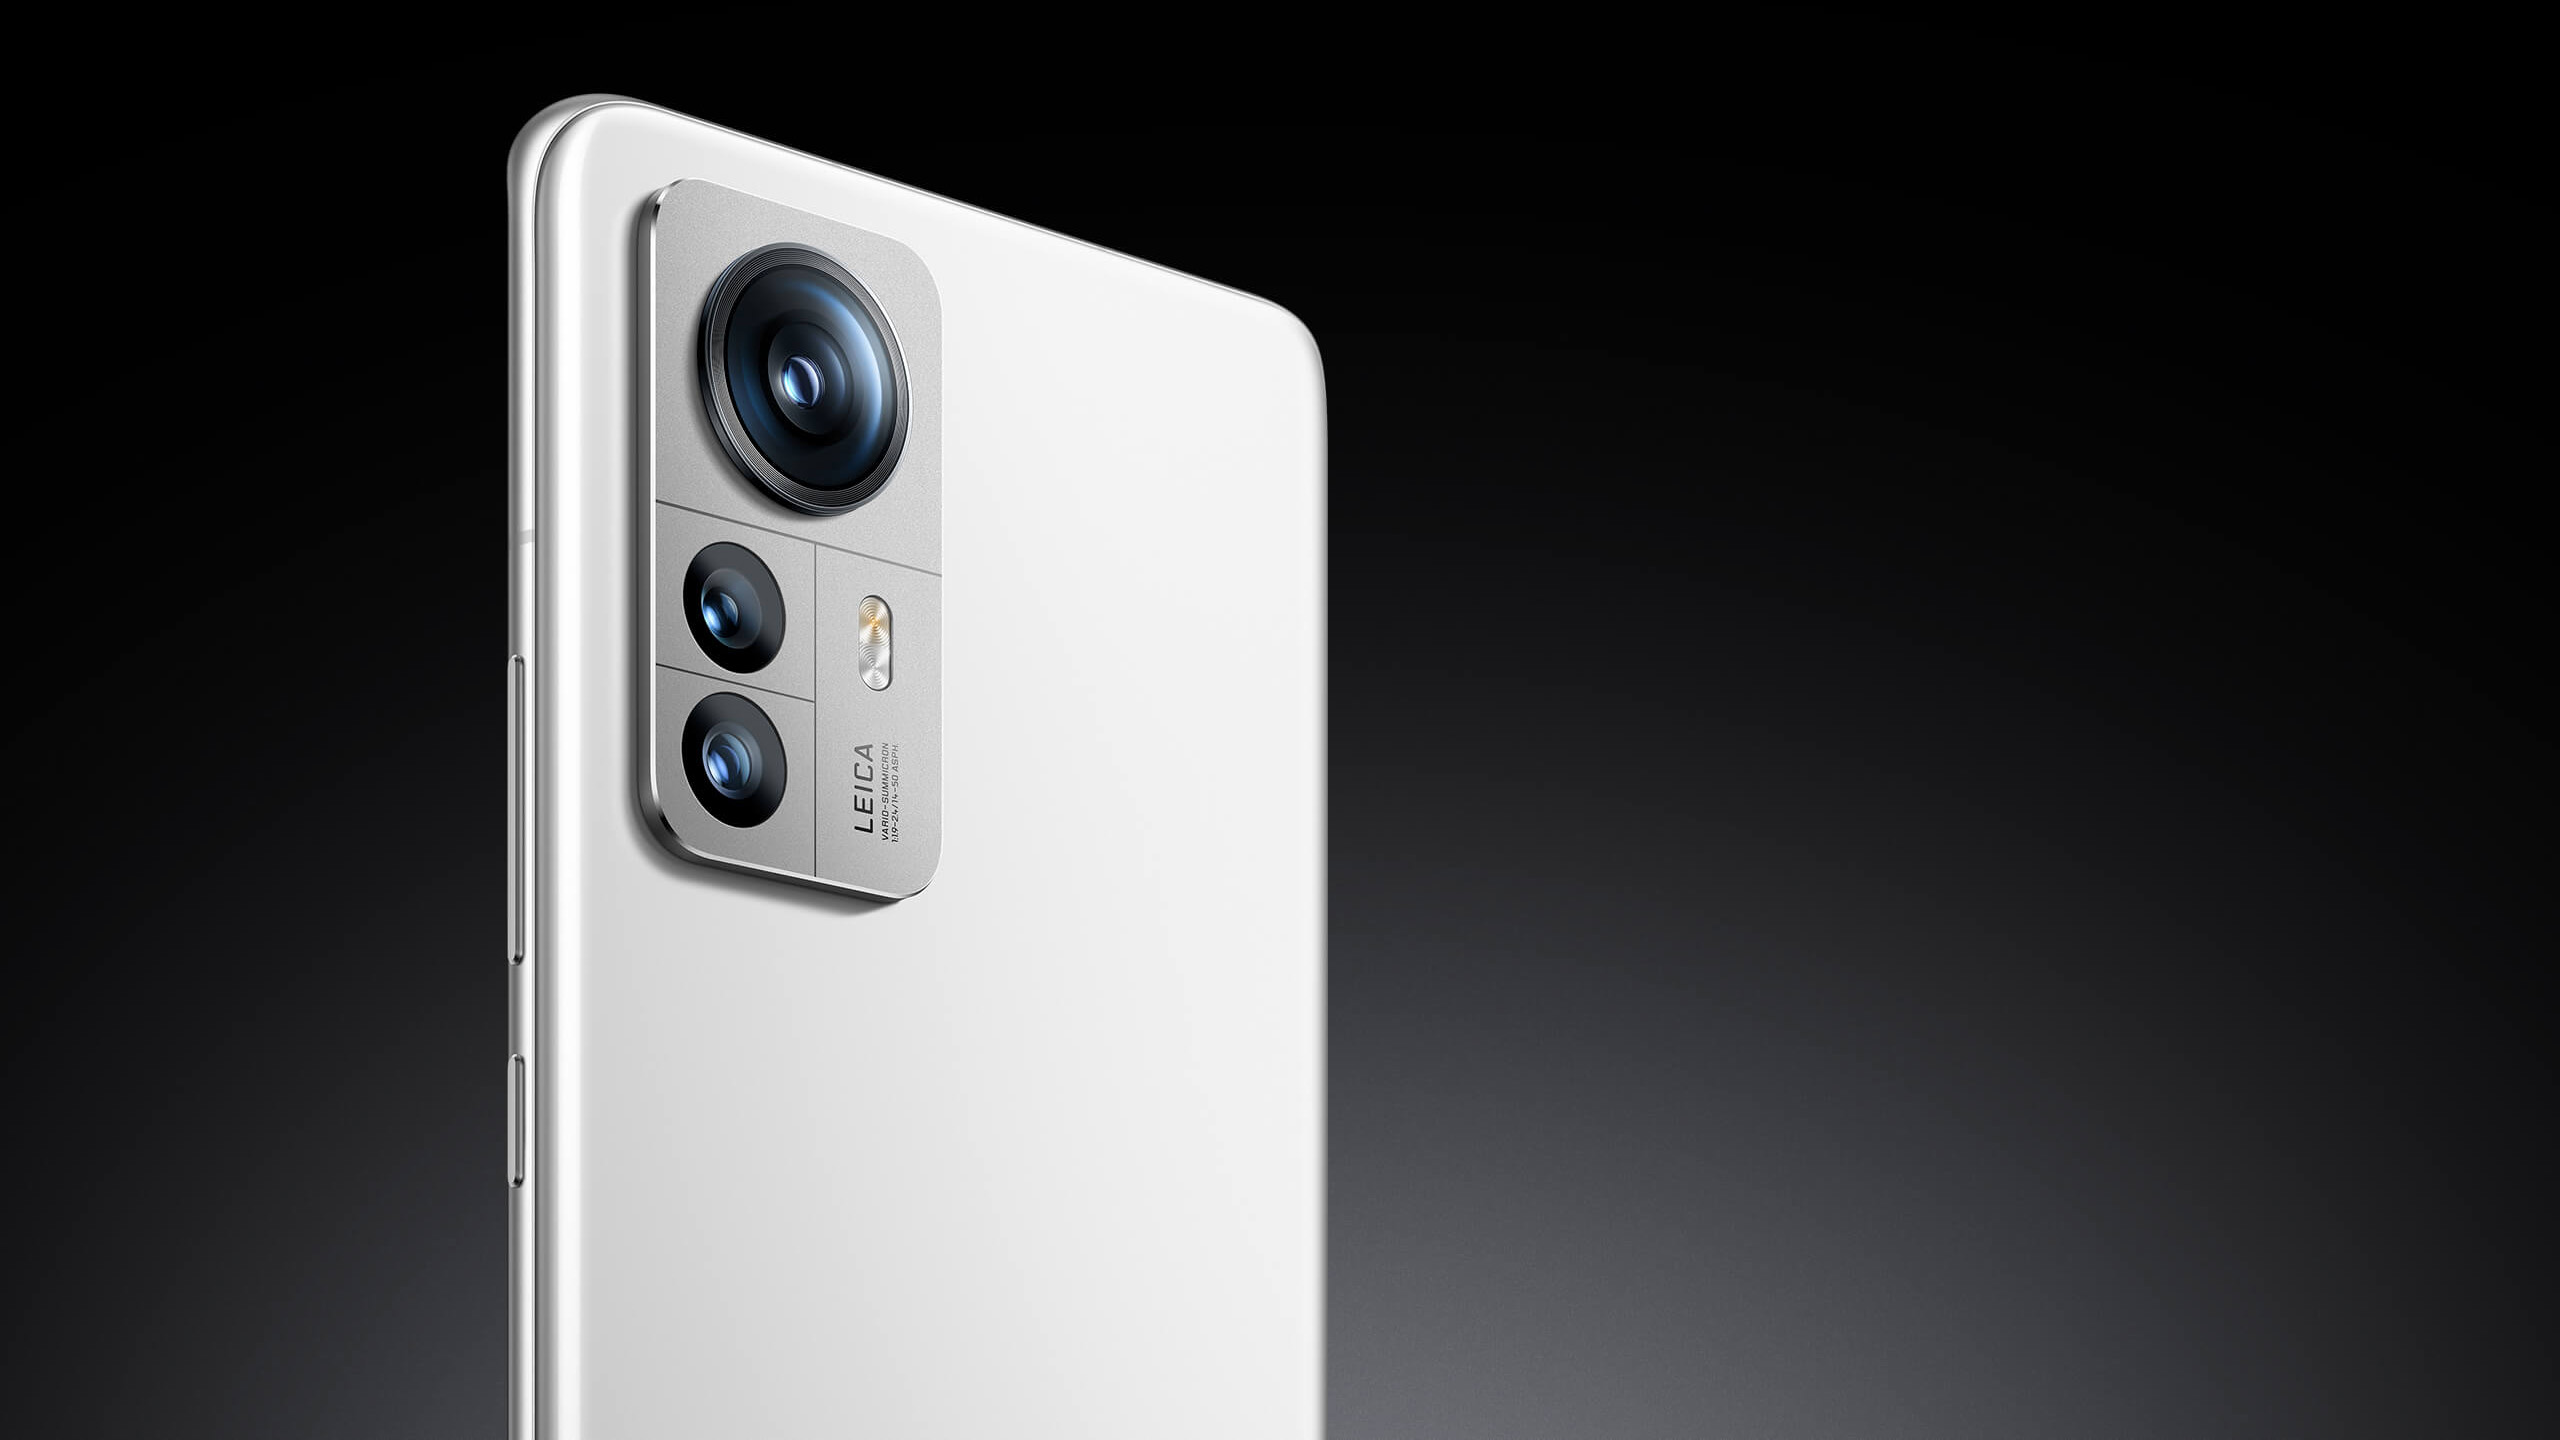 Xiaomi 12S Pro white - Xiaomi 12S Ultra, 12S Pro, 12S Launched with Snapdragon 8+ Gen 1 SoC